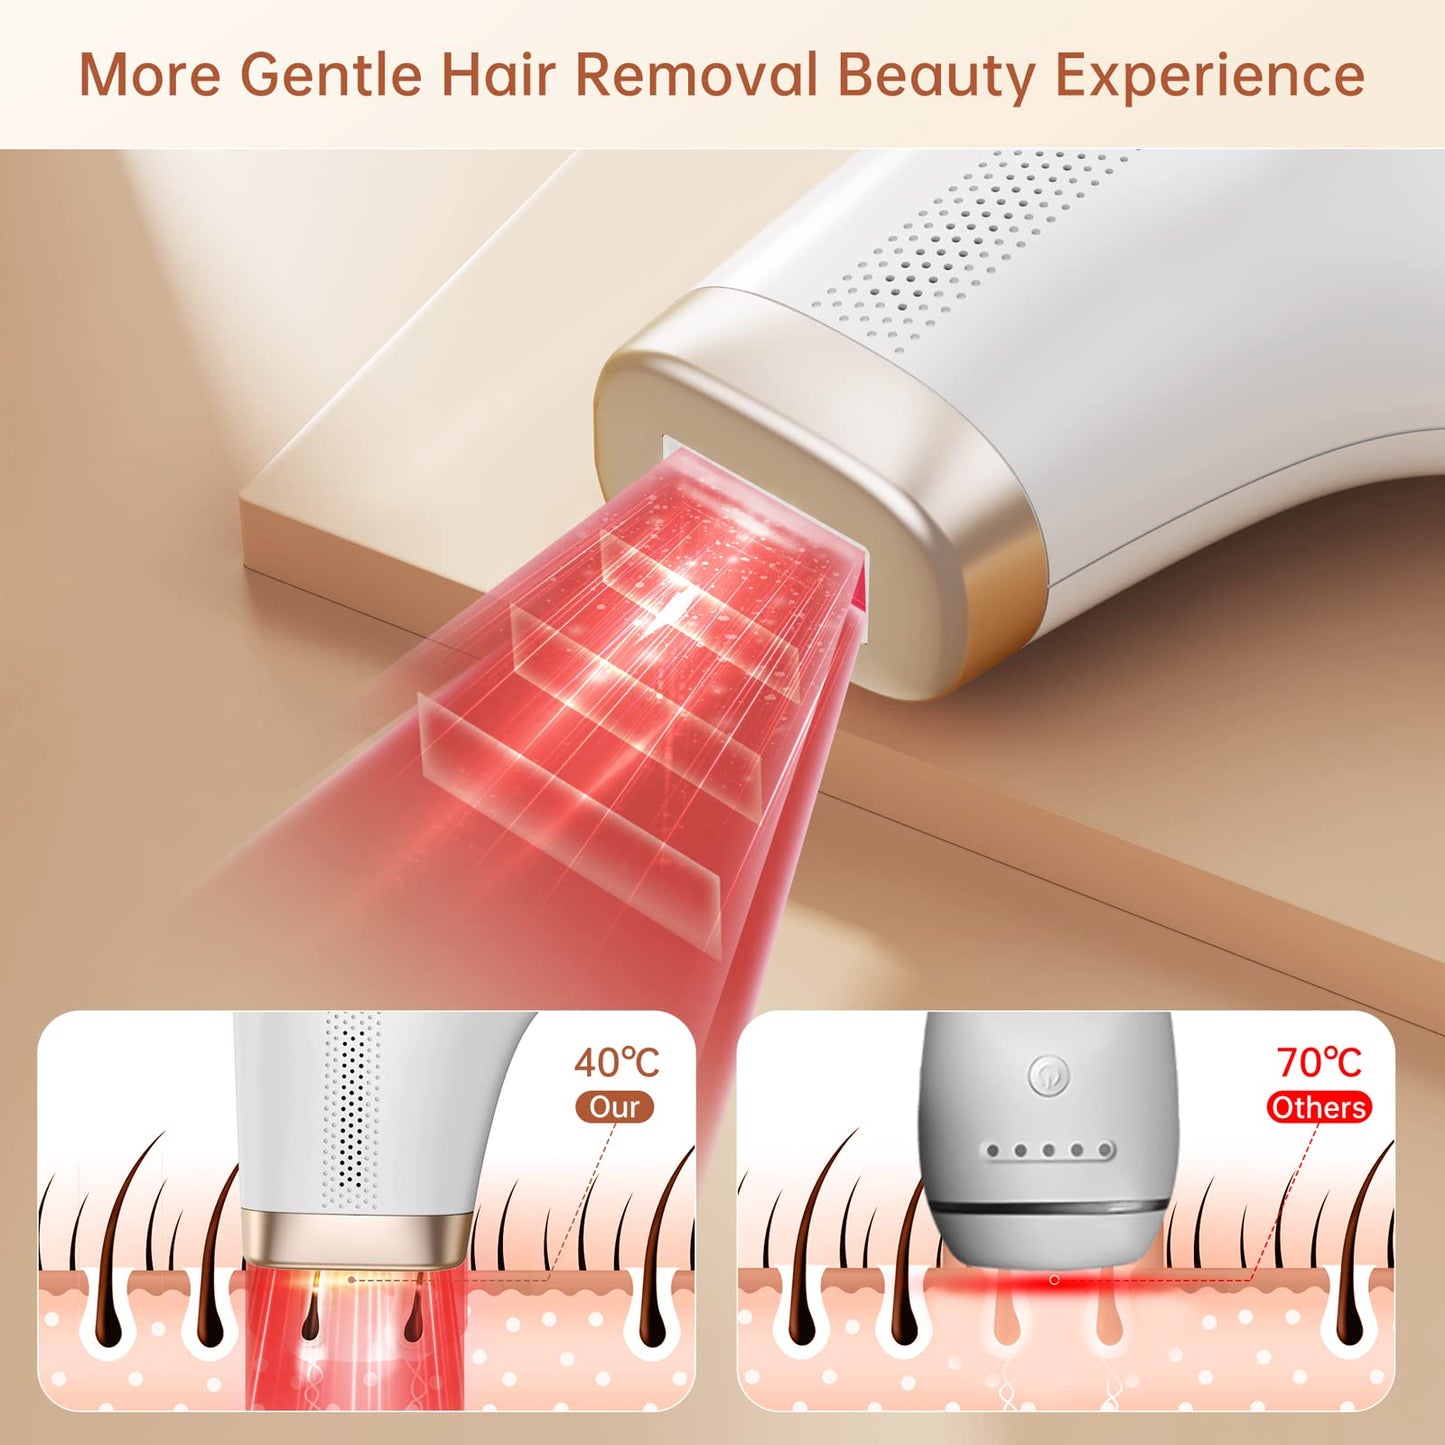 Laser Hair Removal,Permanent IPL Hair Removal for Women at Home Use Laser Hair Remover Painless Hair Removal Device for Whole Body Use